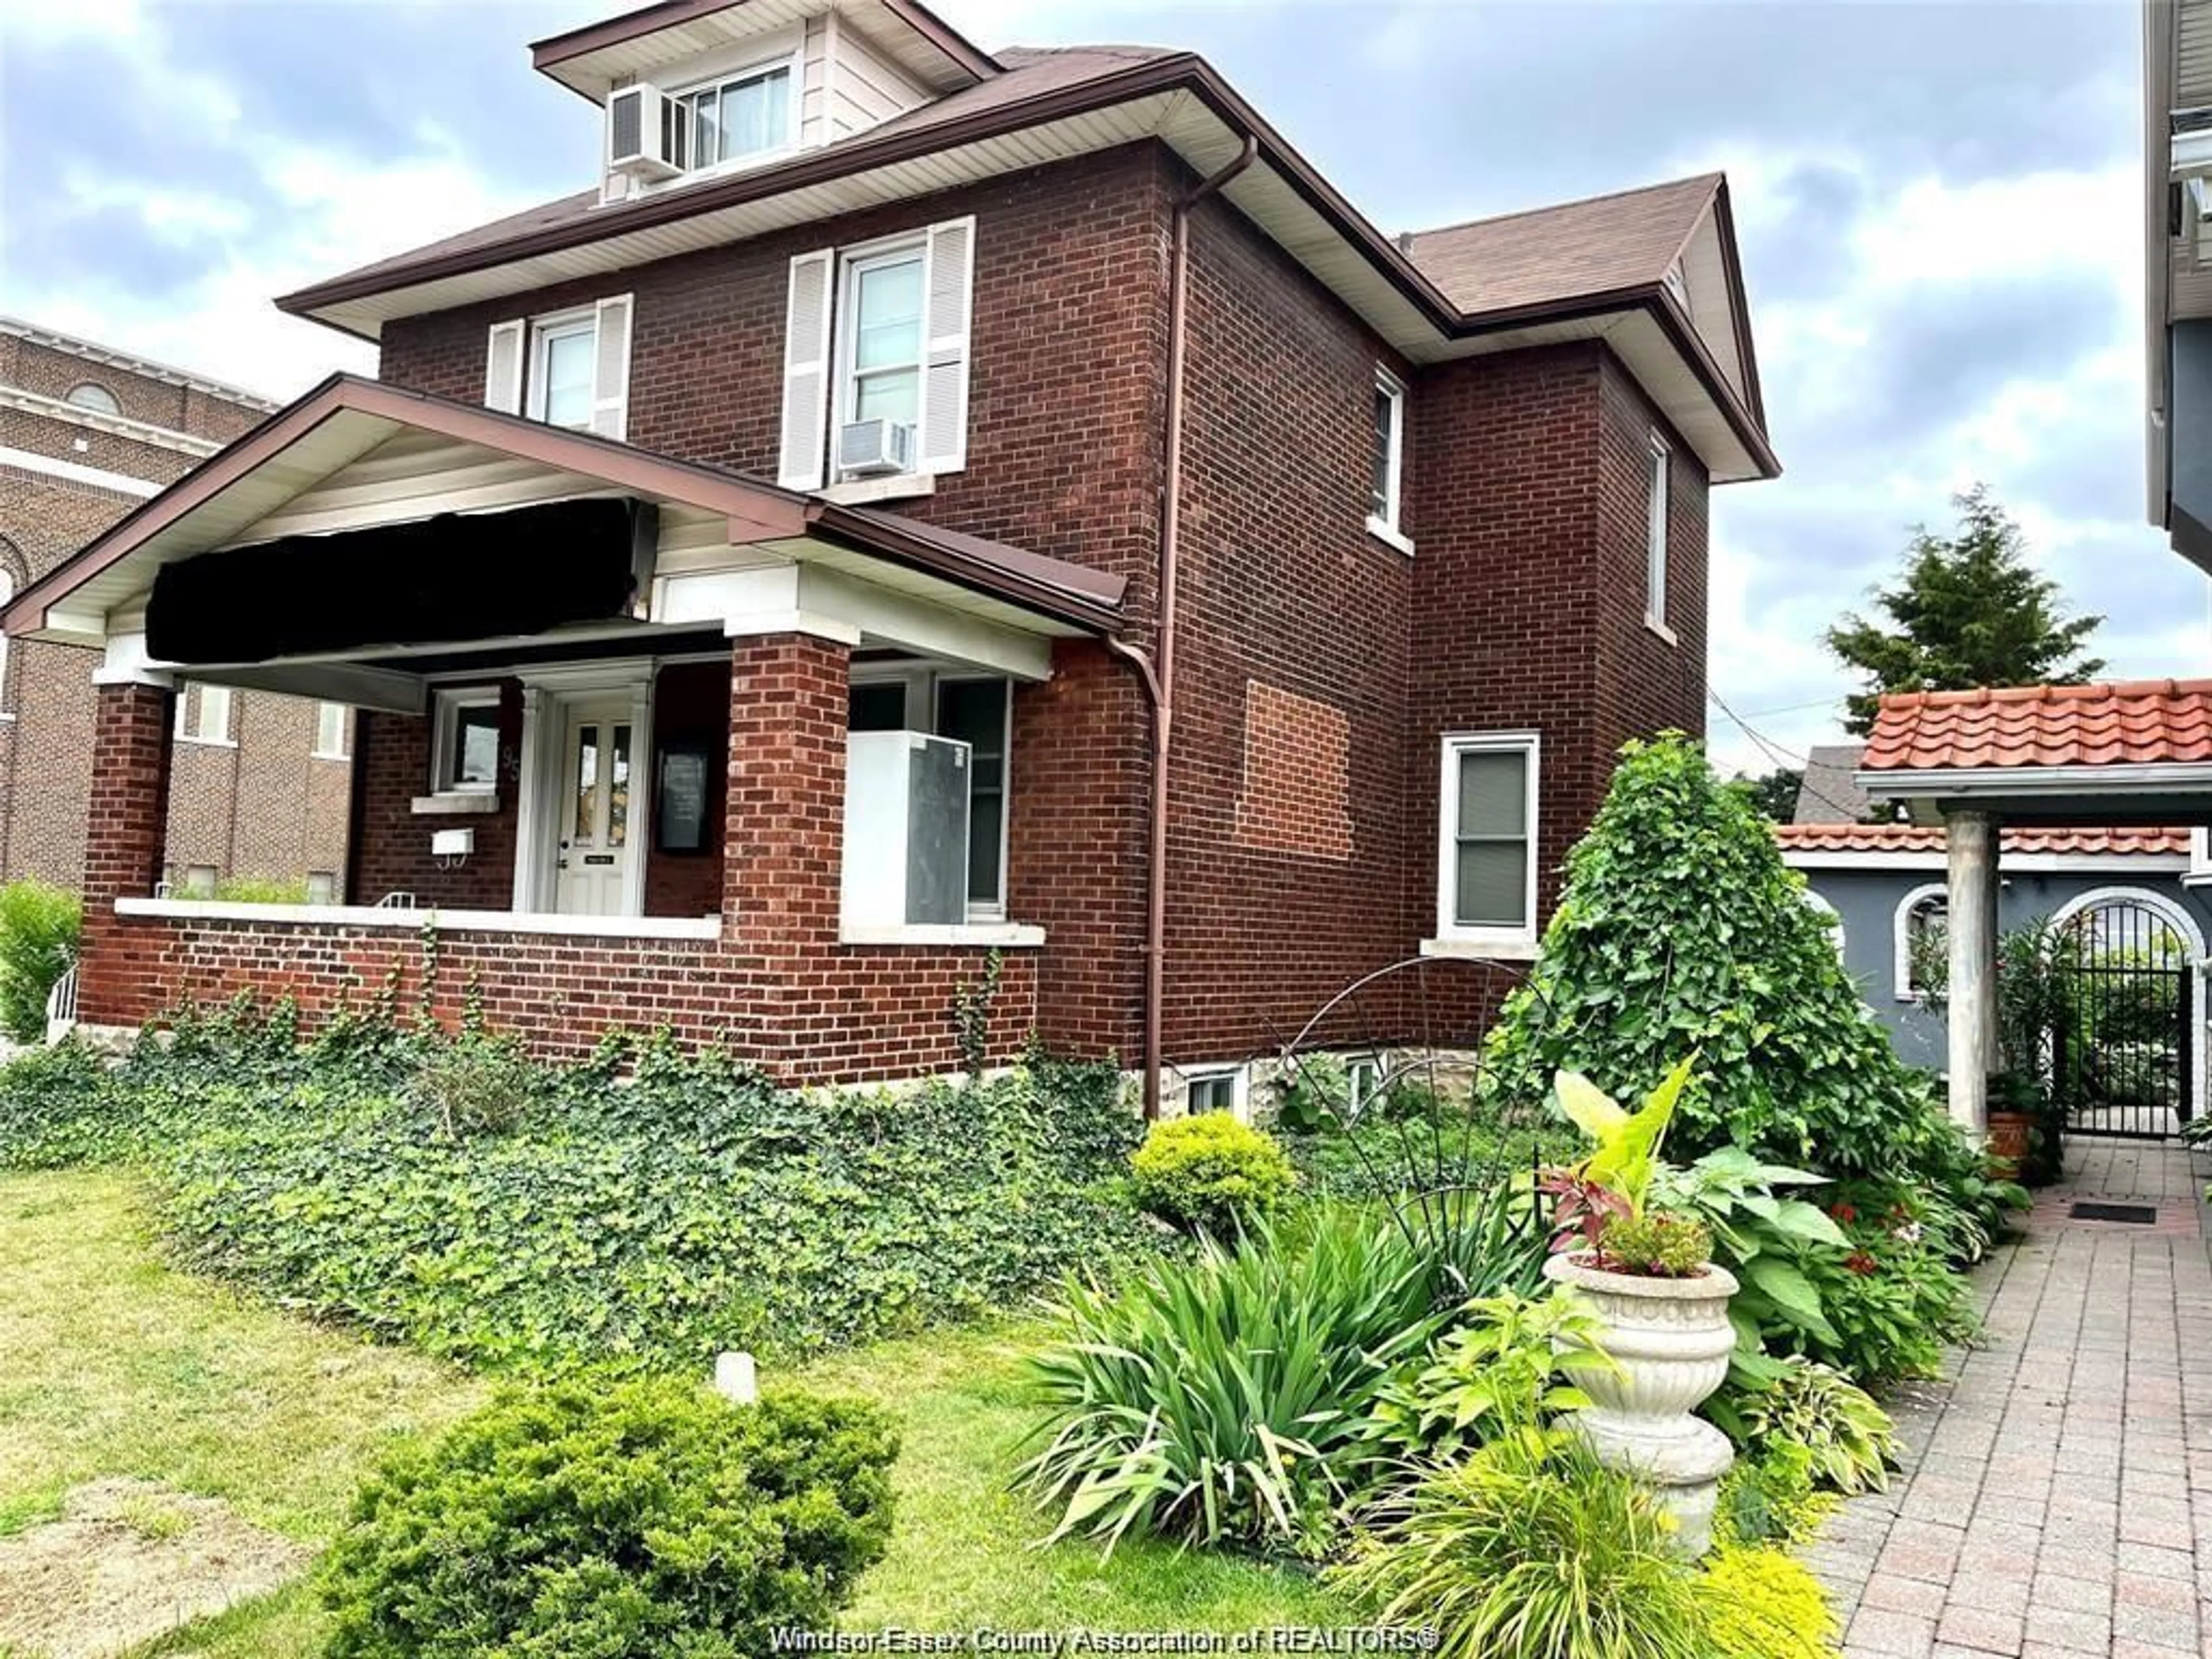 Home with brick exterior material for 95 GILES Blvd, Windsor Ontario N9A 4B8